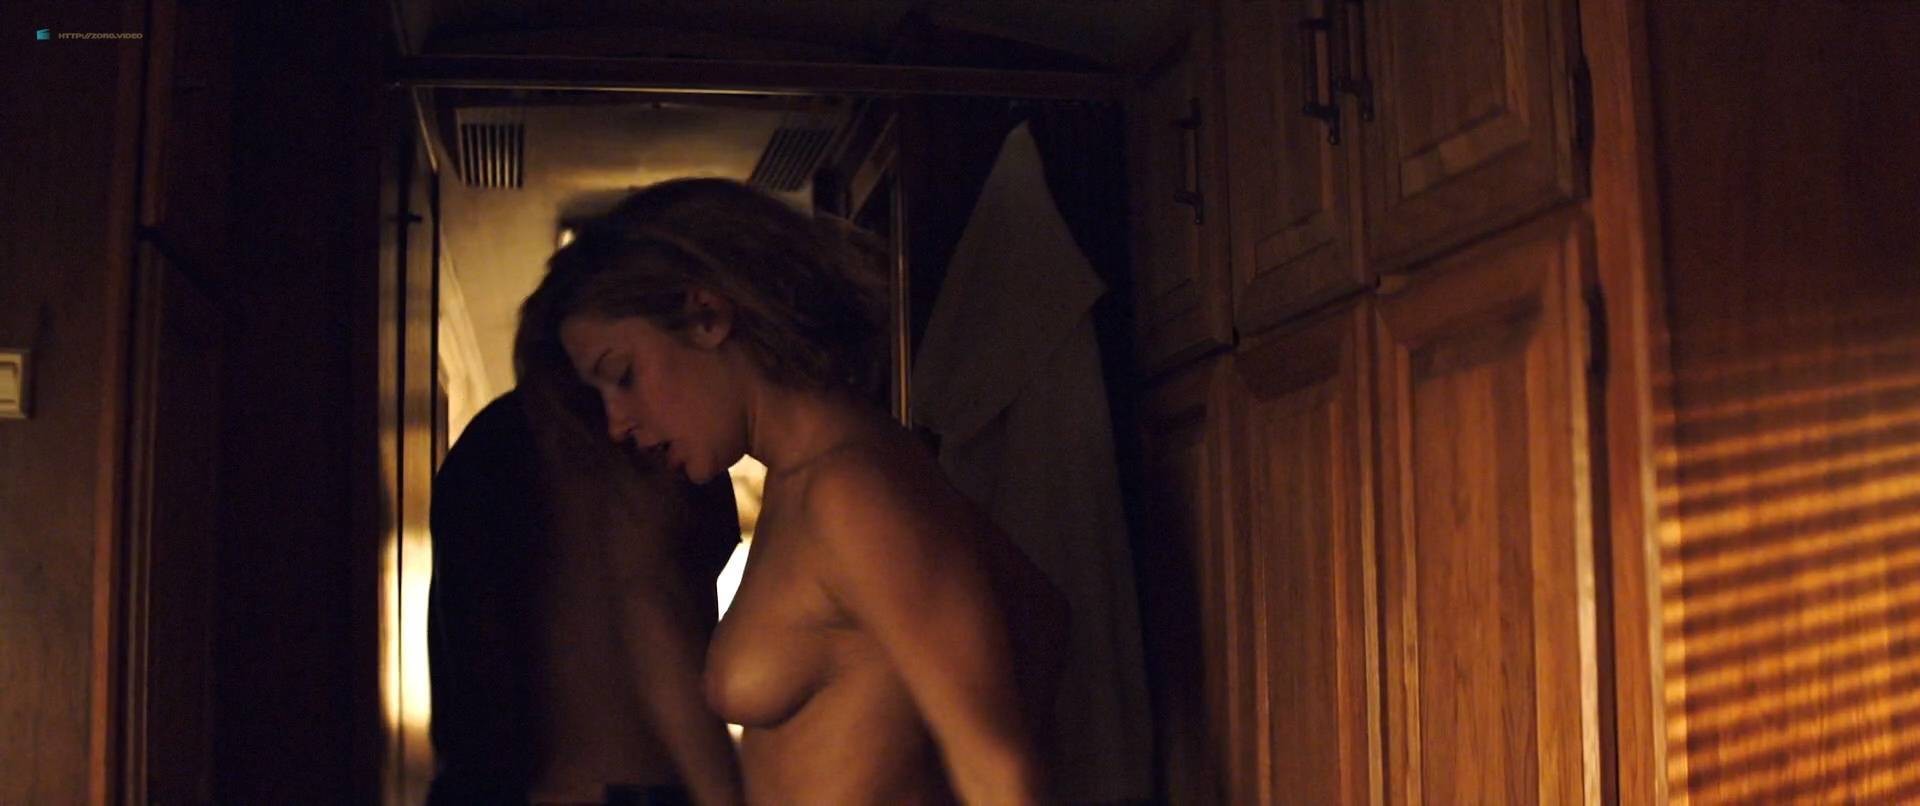 Adele Exarchopoulos Nude Pose